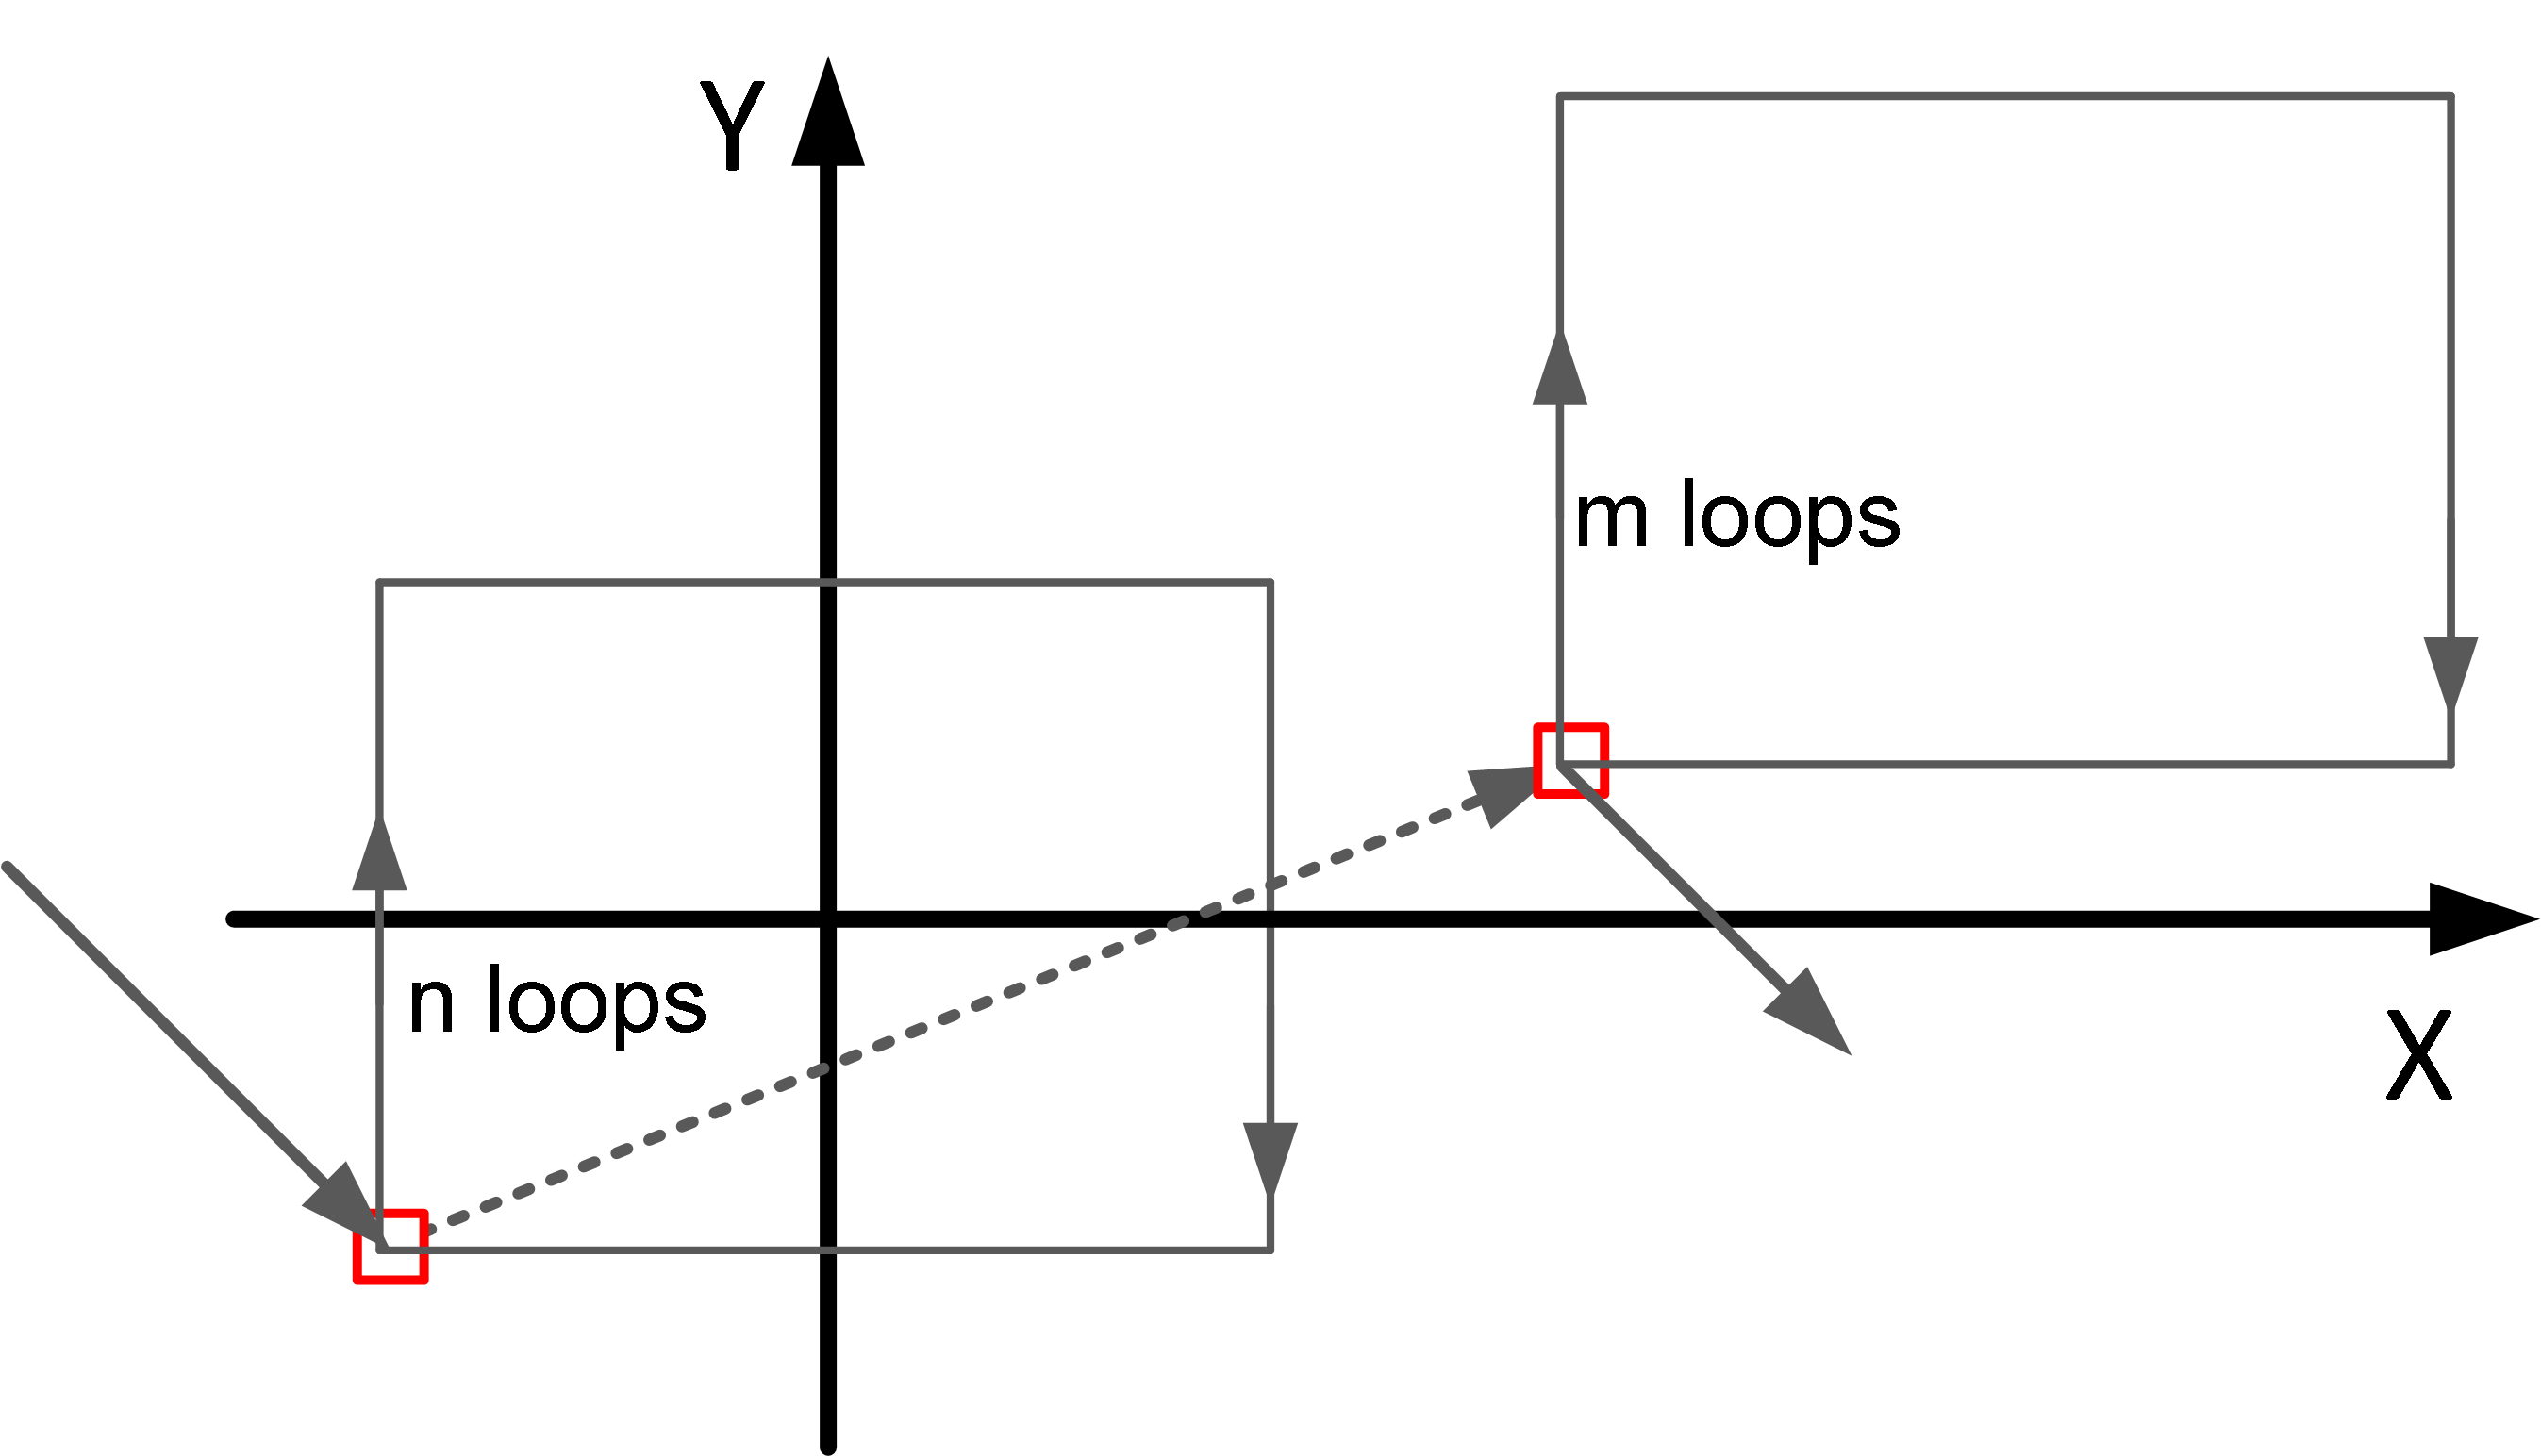 Succession of real-time loops